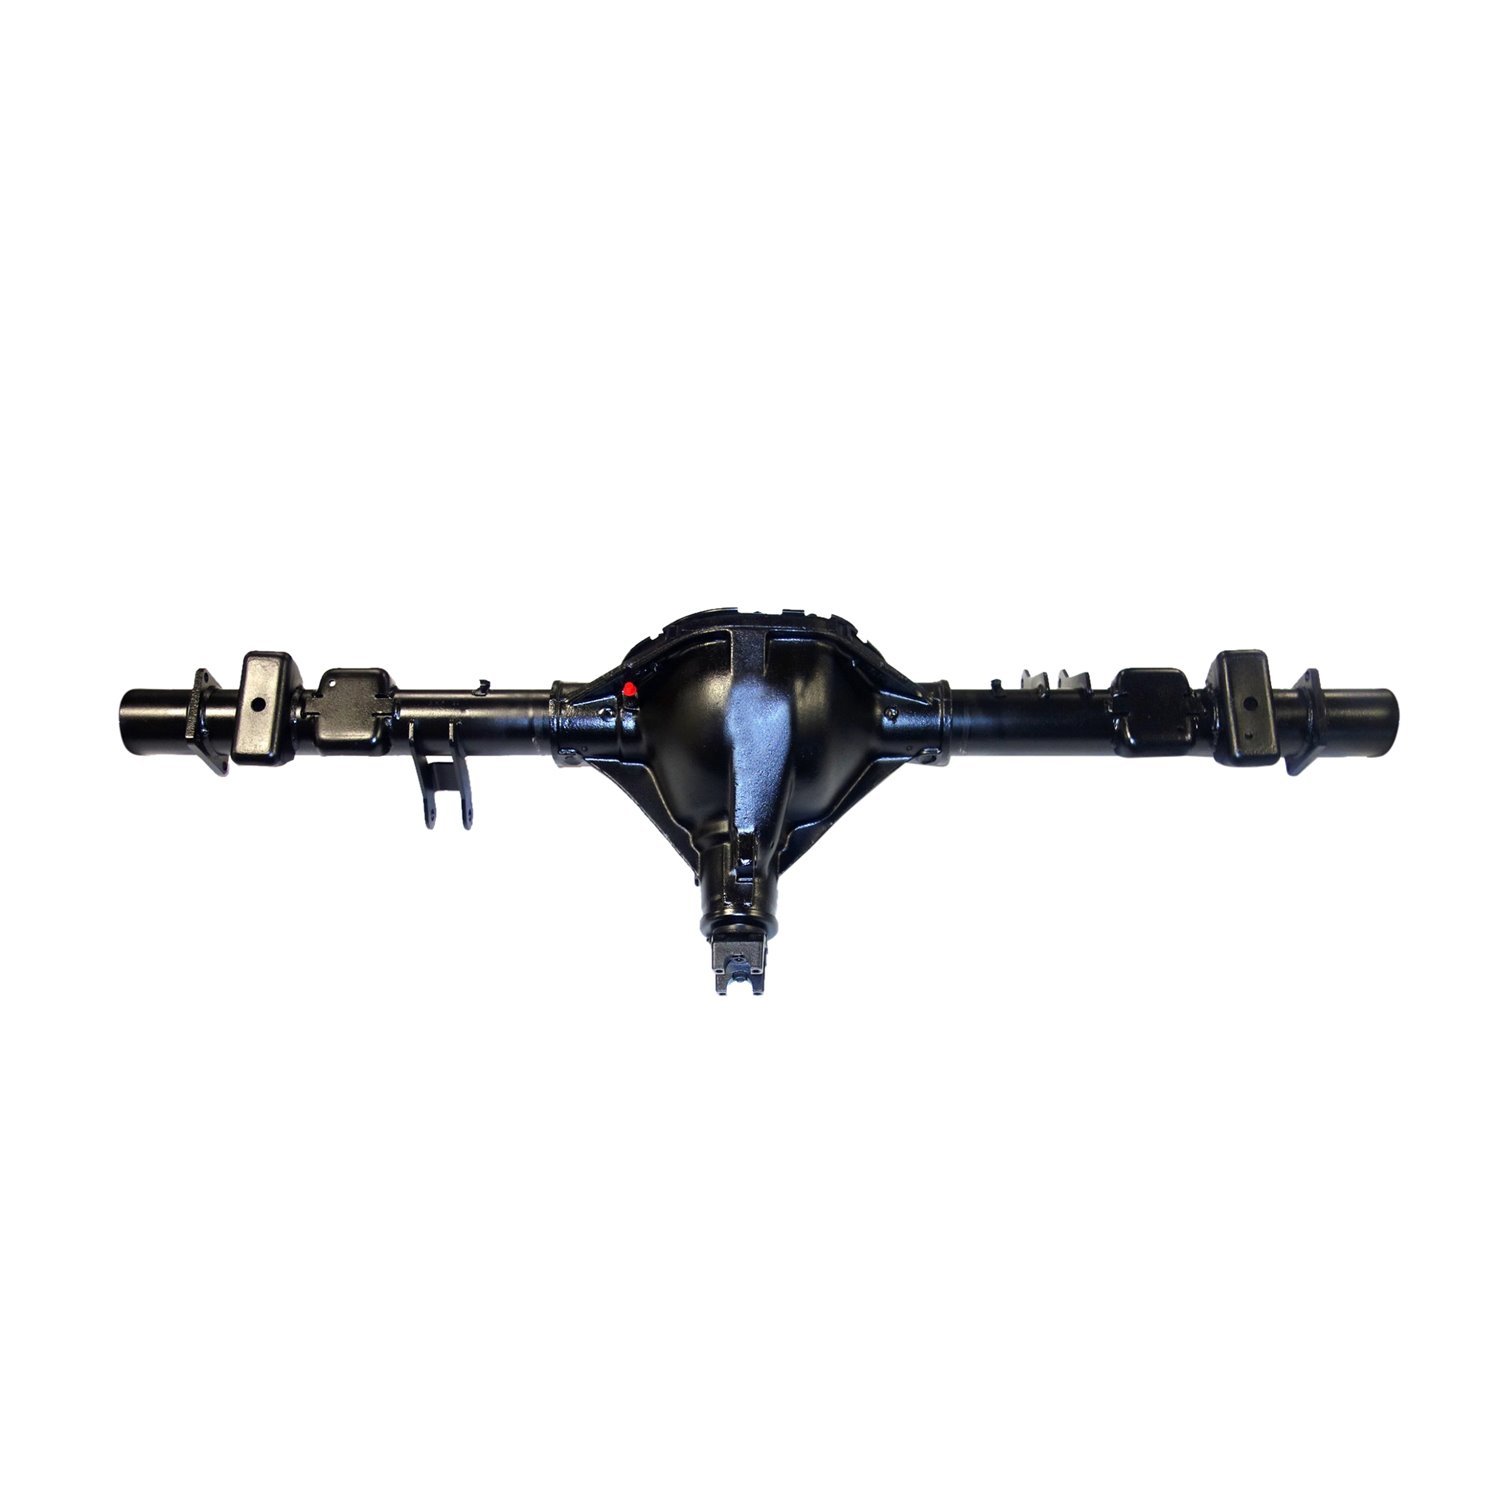 Remanufactured Complete Axle Assembly for GM 9.5" 00-05 GM 2500 4.11 Ratio